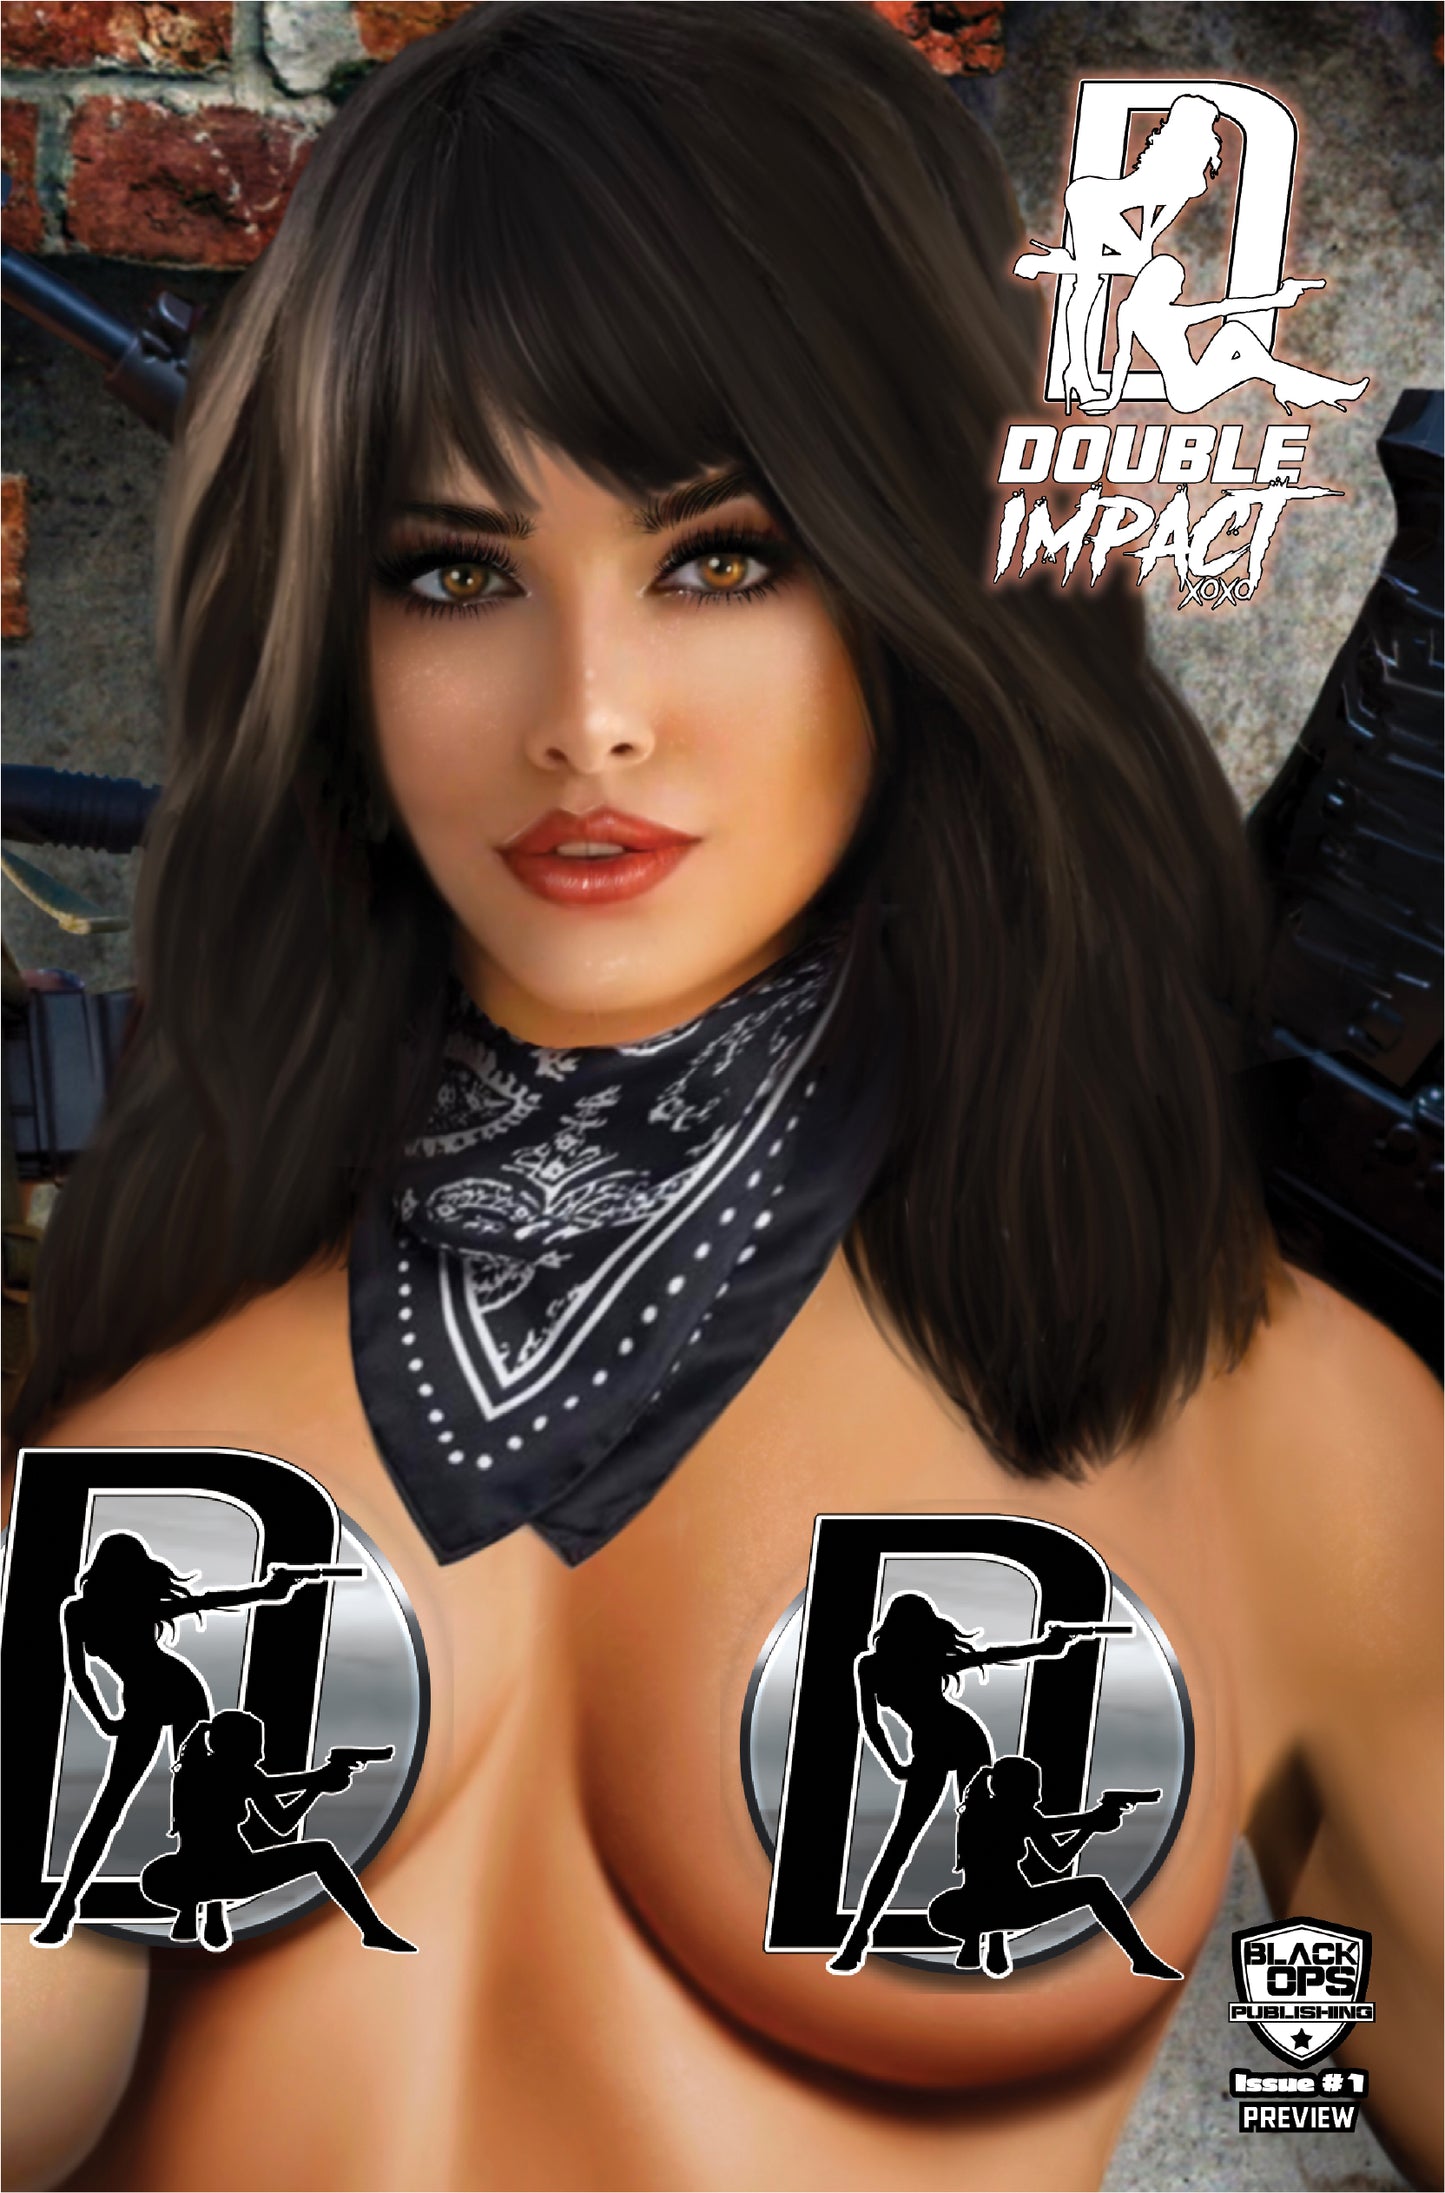 DOUBLE IMPACT #1 PREVIEW EDITION - PIPER UP-CLOSE NAUGHTY CONNECTING SET - LTD 200